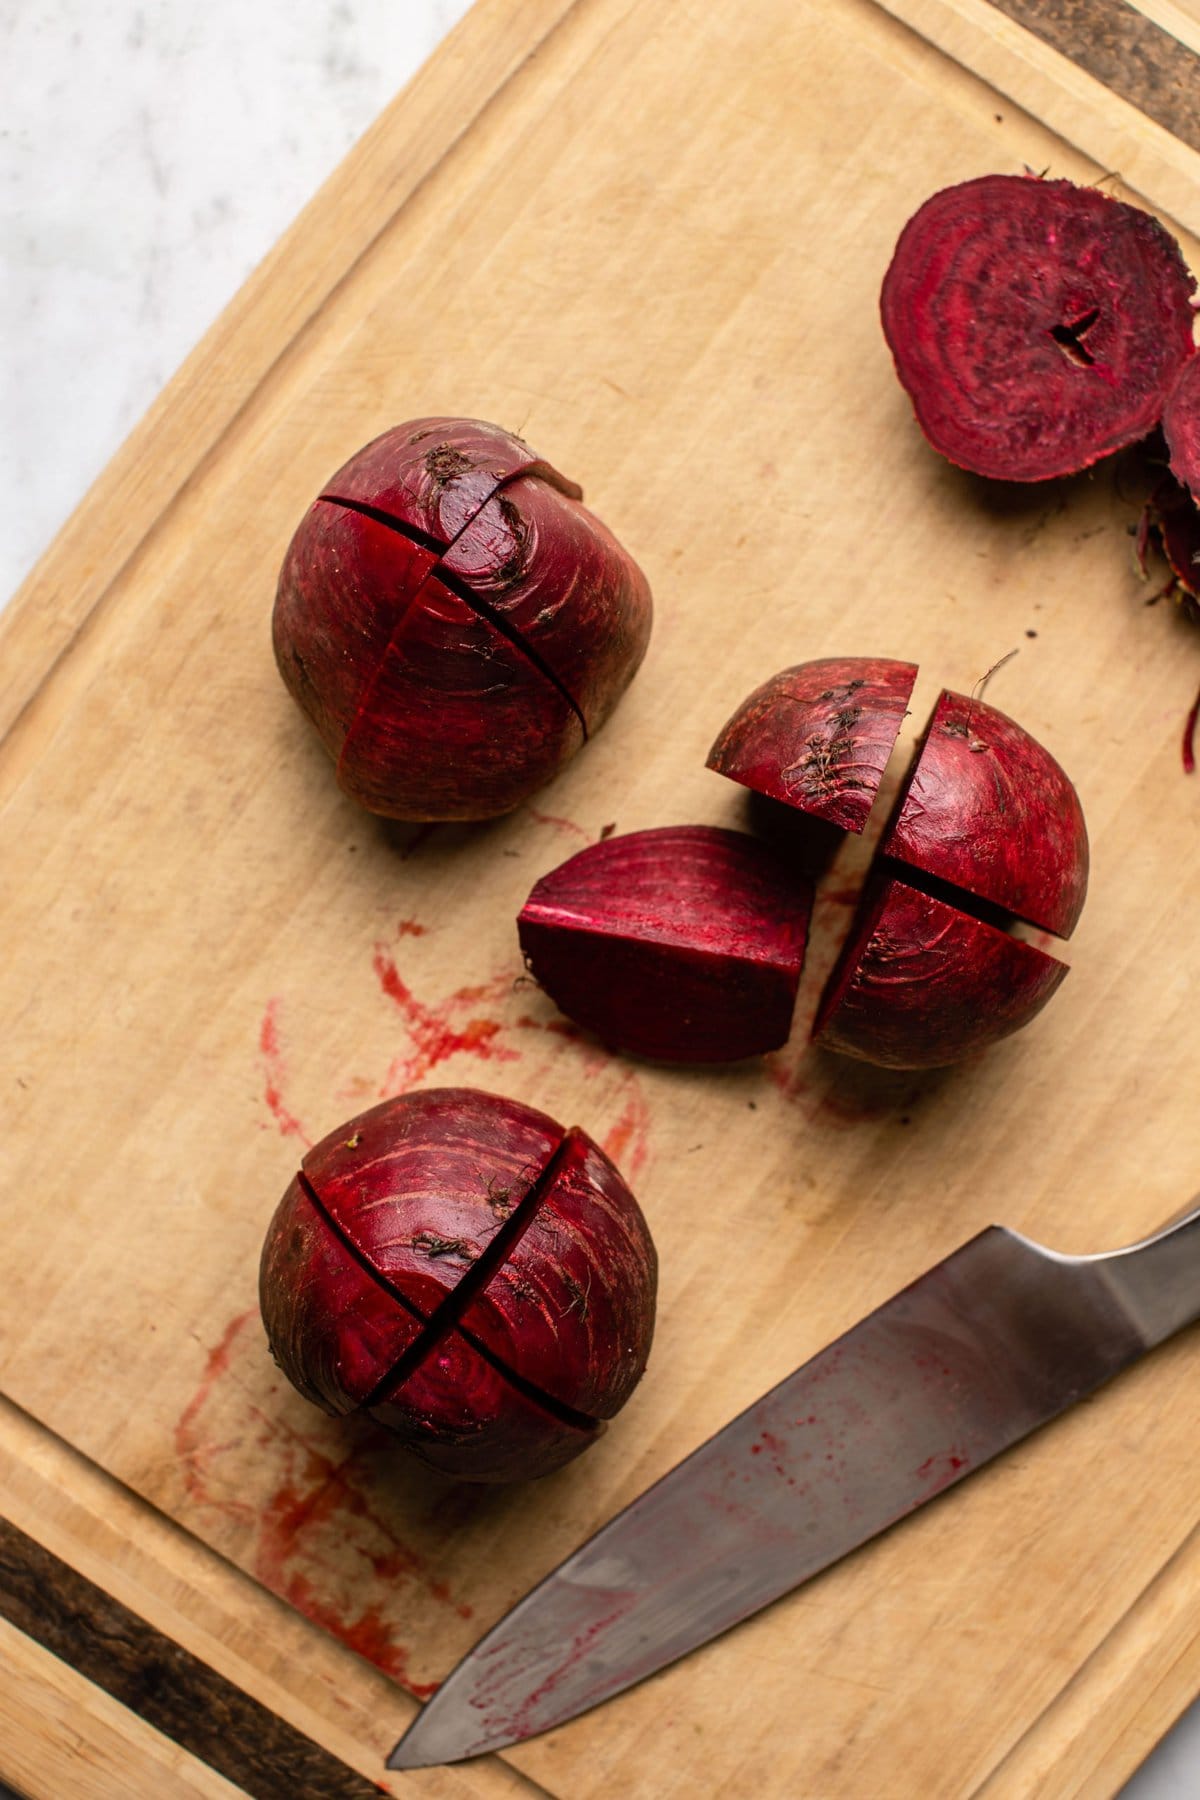 beets cut into quarters on wood cutting board